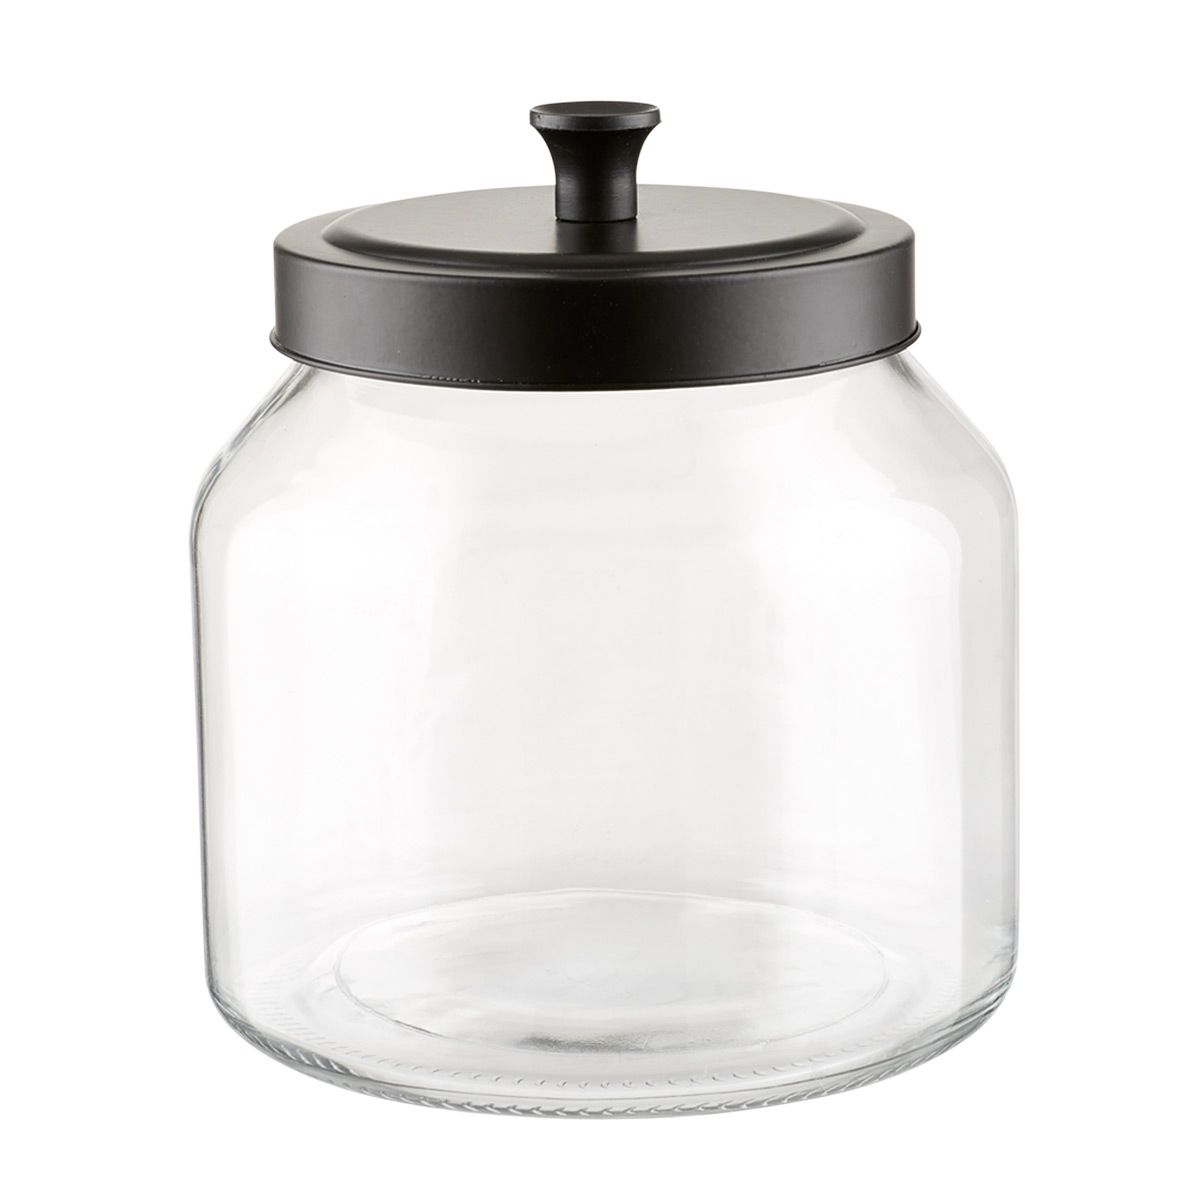 Glass Canister | The Container Store